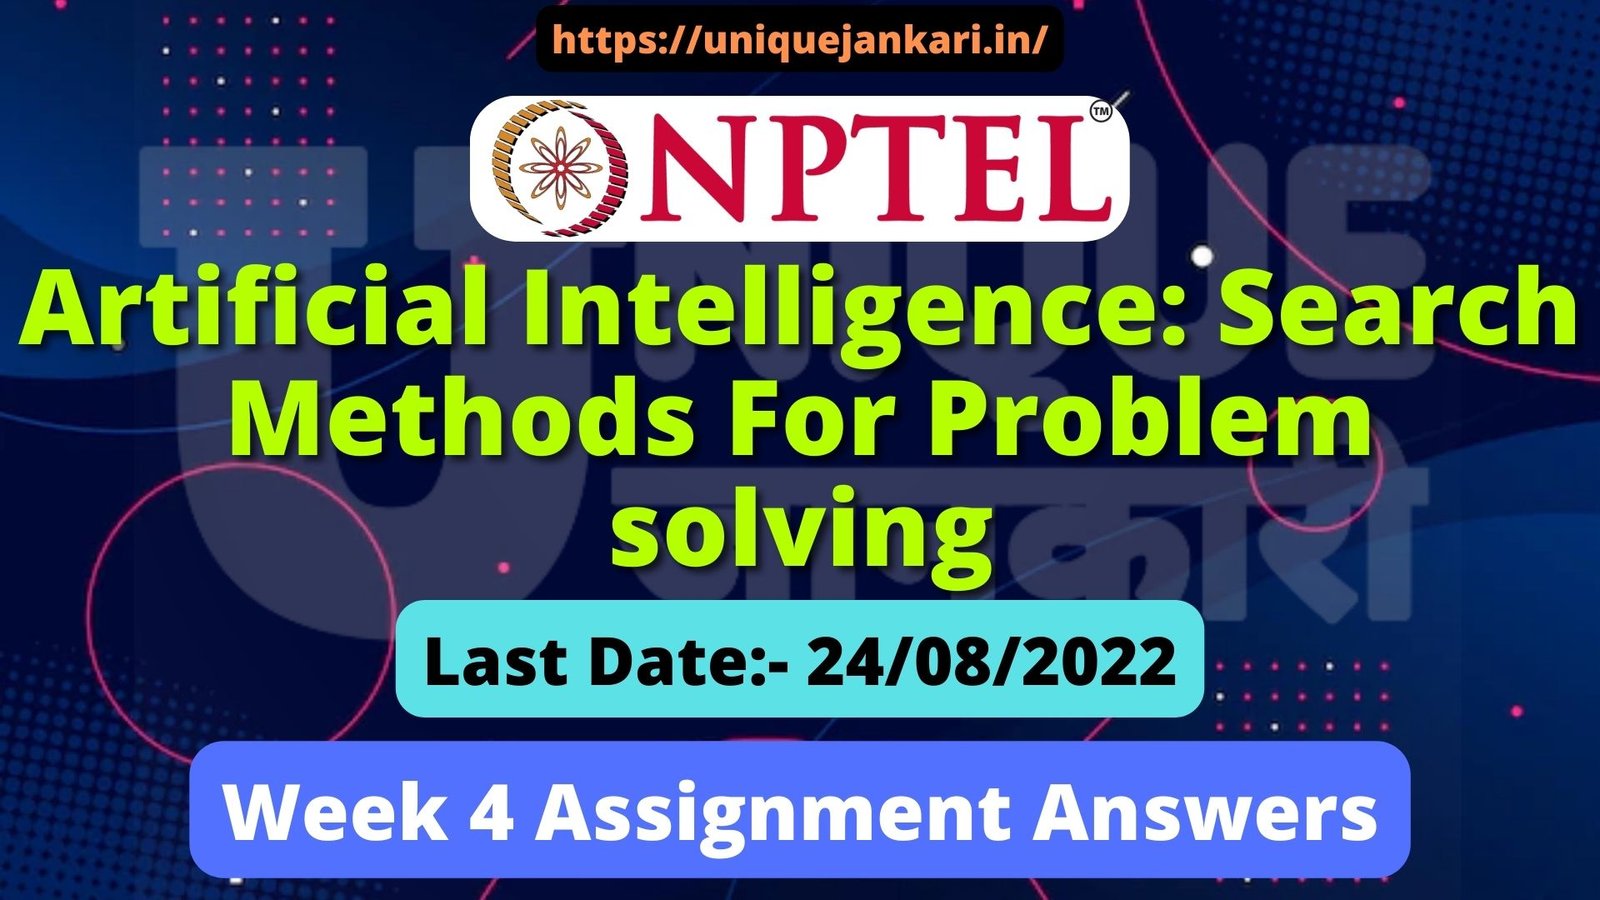 artificial intelligence search methods for problem solving assignment answers